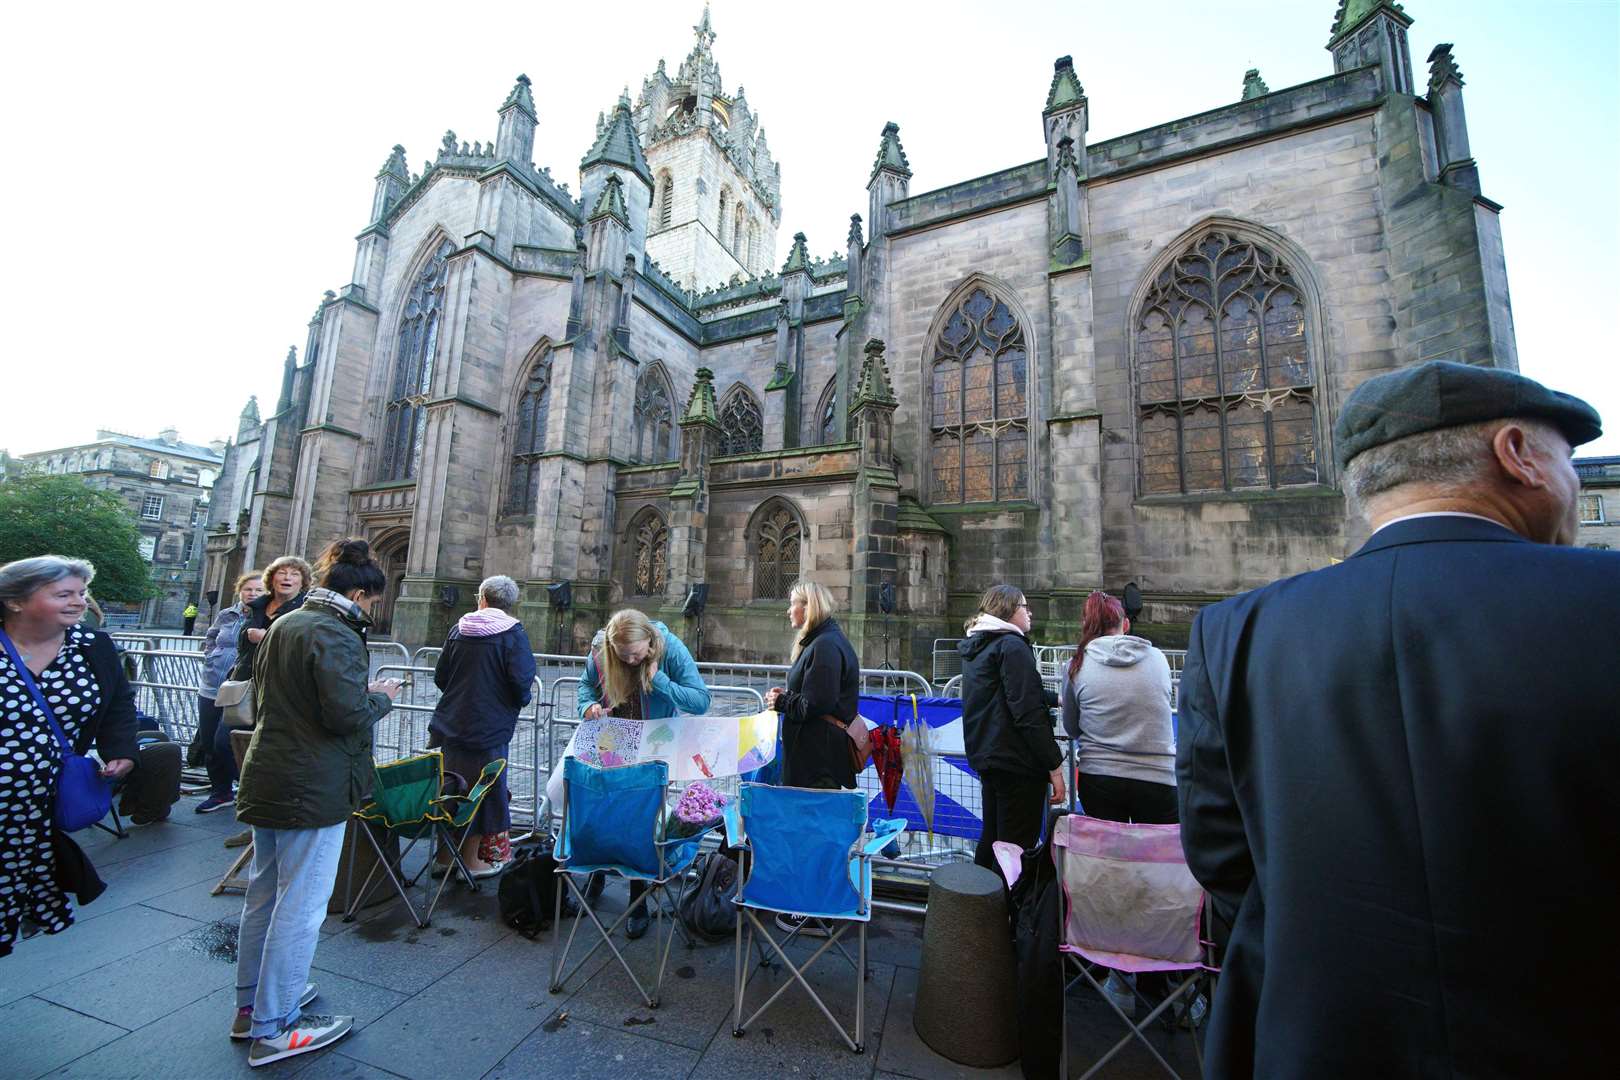 Large numbers are expected at St Giles’ Cathedral (Peter Byrne/PA)